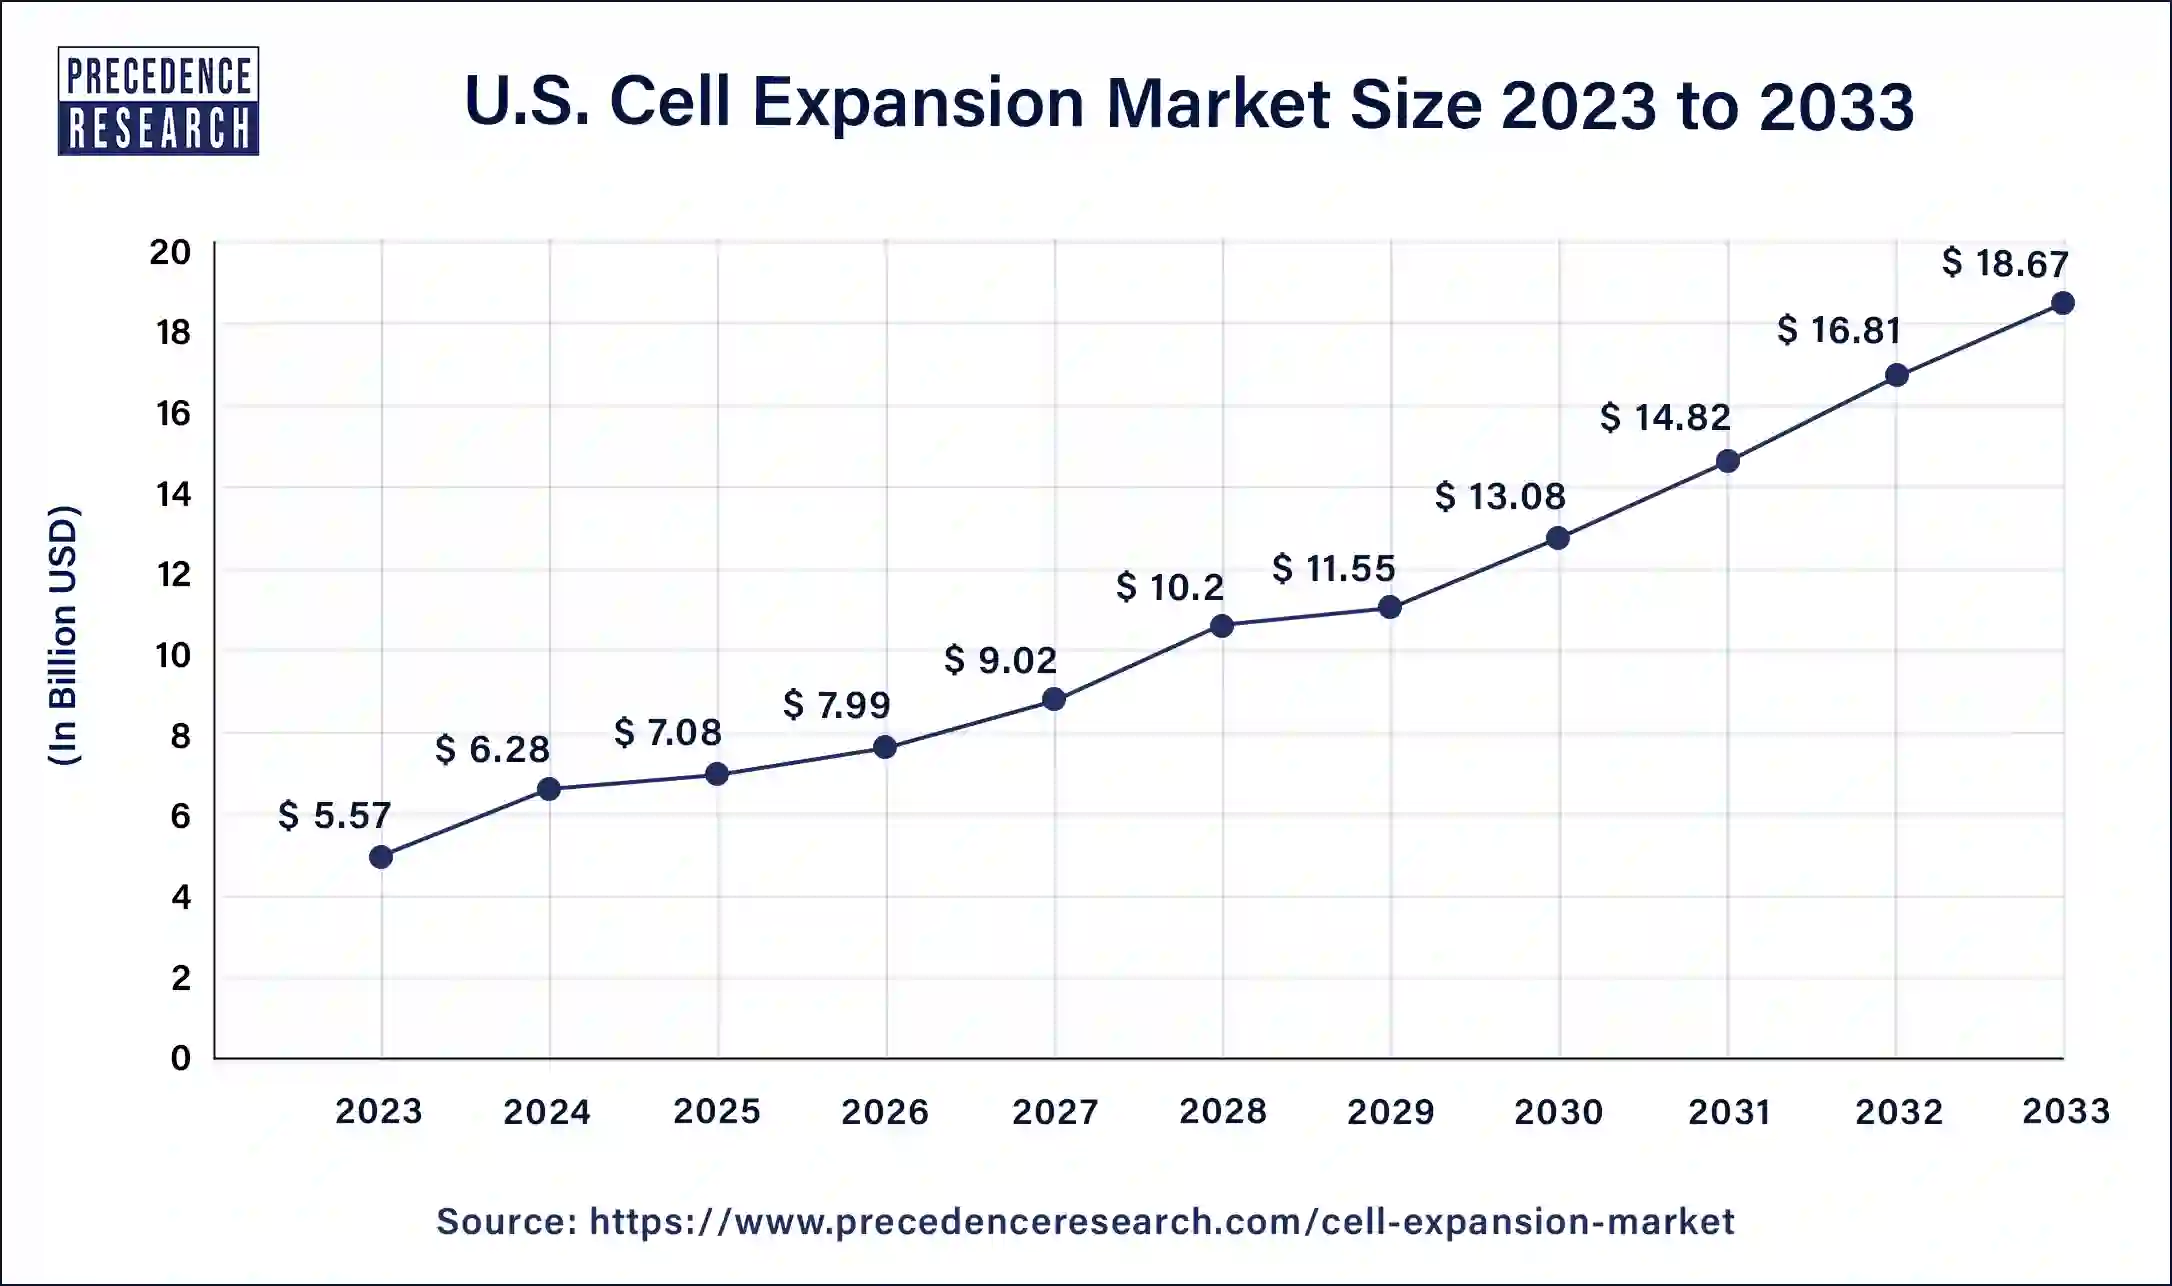 U.S. Cell Expansion Market Size 2024 to 2033